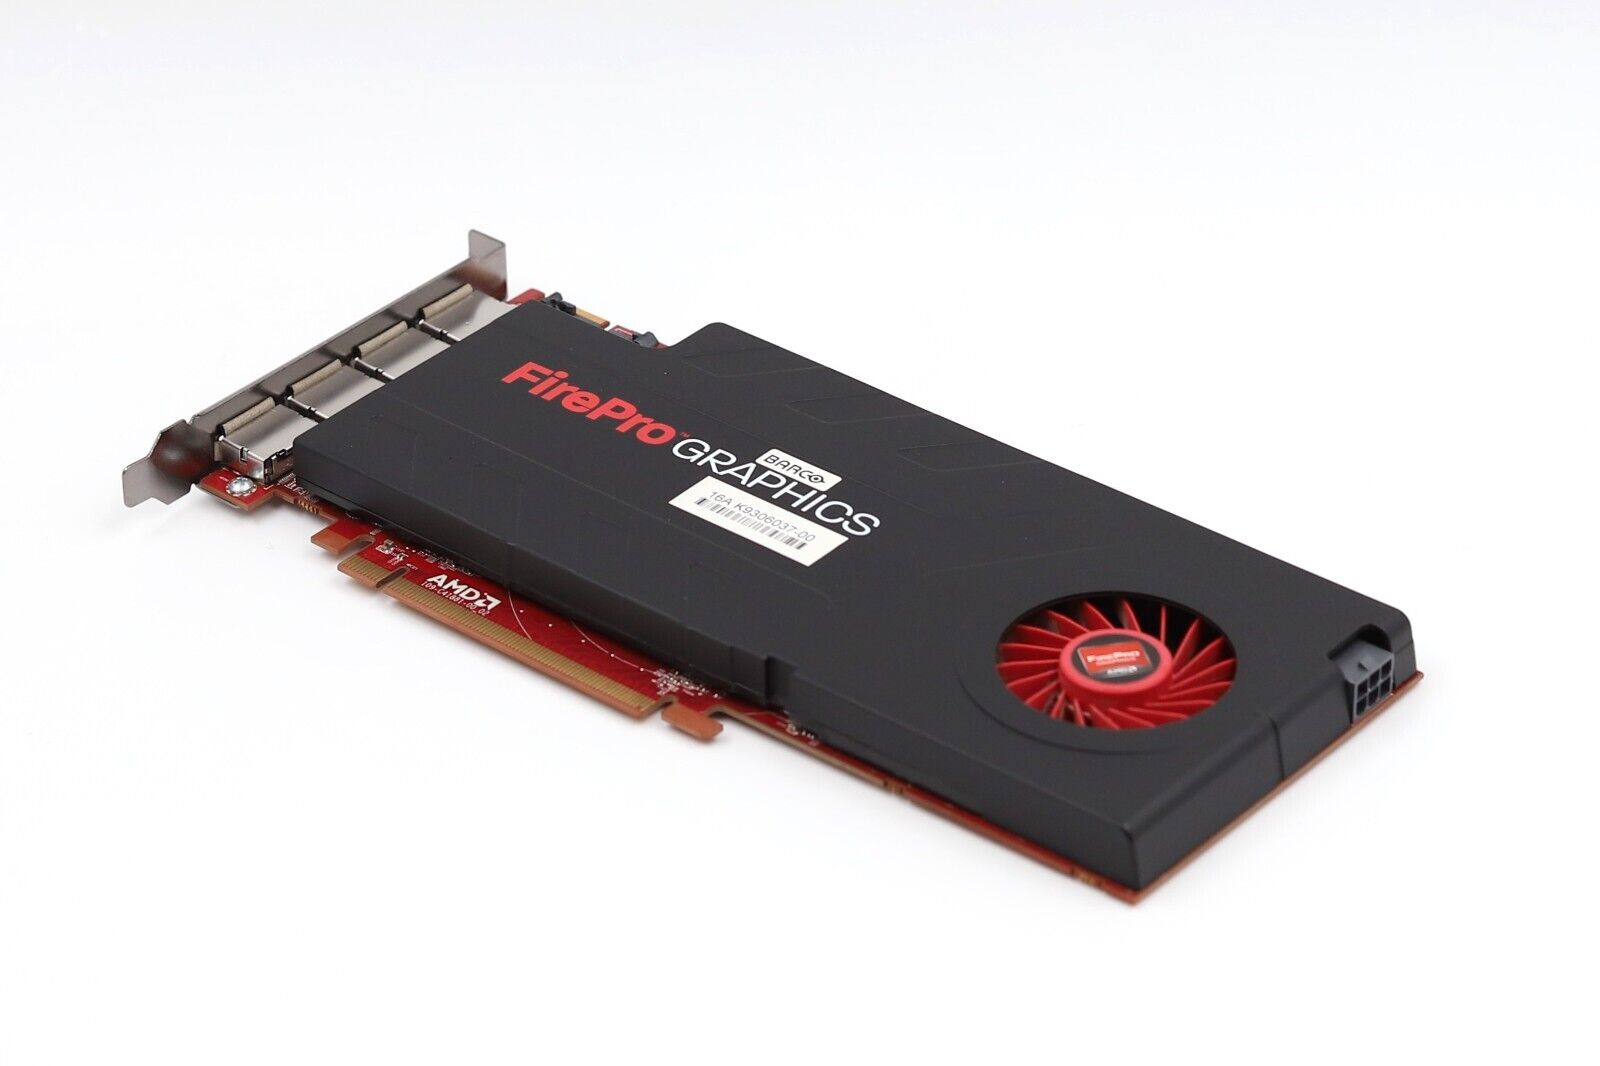 Barco AMD FirePro MXRT 7500 4GB GDDR5 PCIe Graphic Card P/N: 102C4180800 Tested